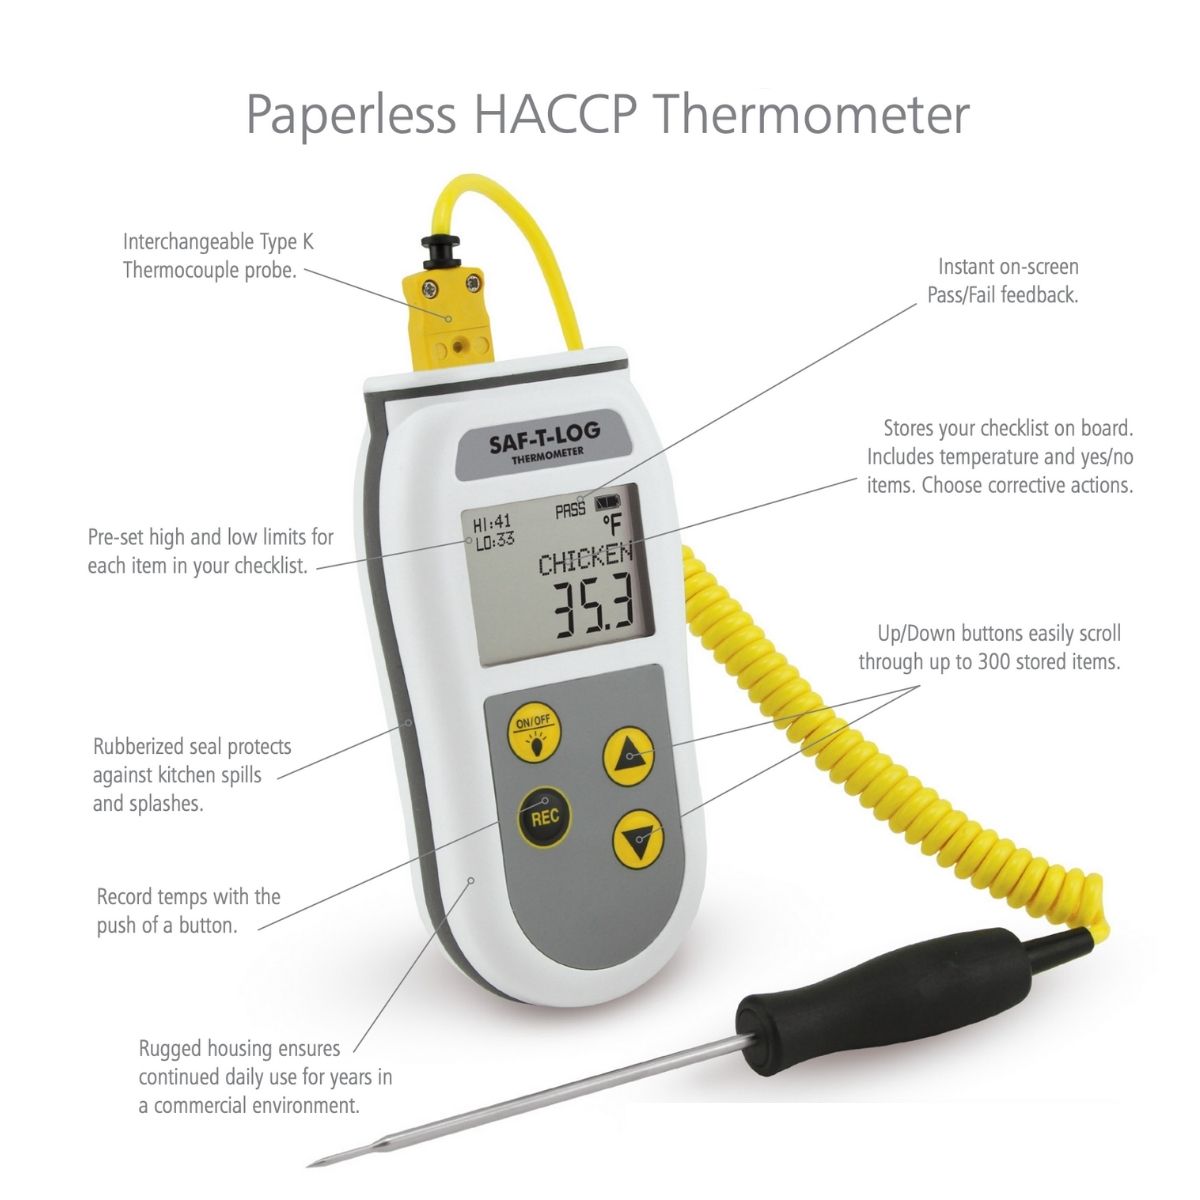 https://www.foodsafe.net.nz/wp-content/uploads/2021/09/Paperless-HACCP-Thermometer-Saf-T-Log%C2%AE.jpg